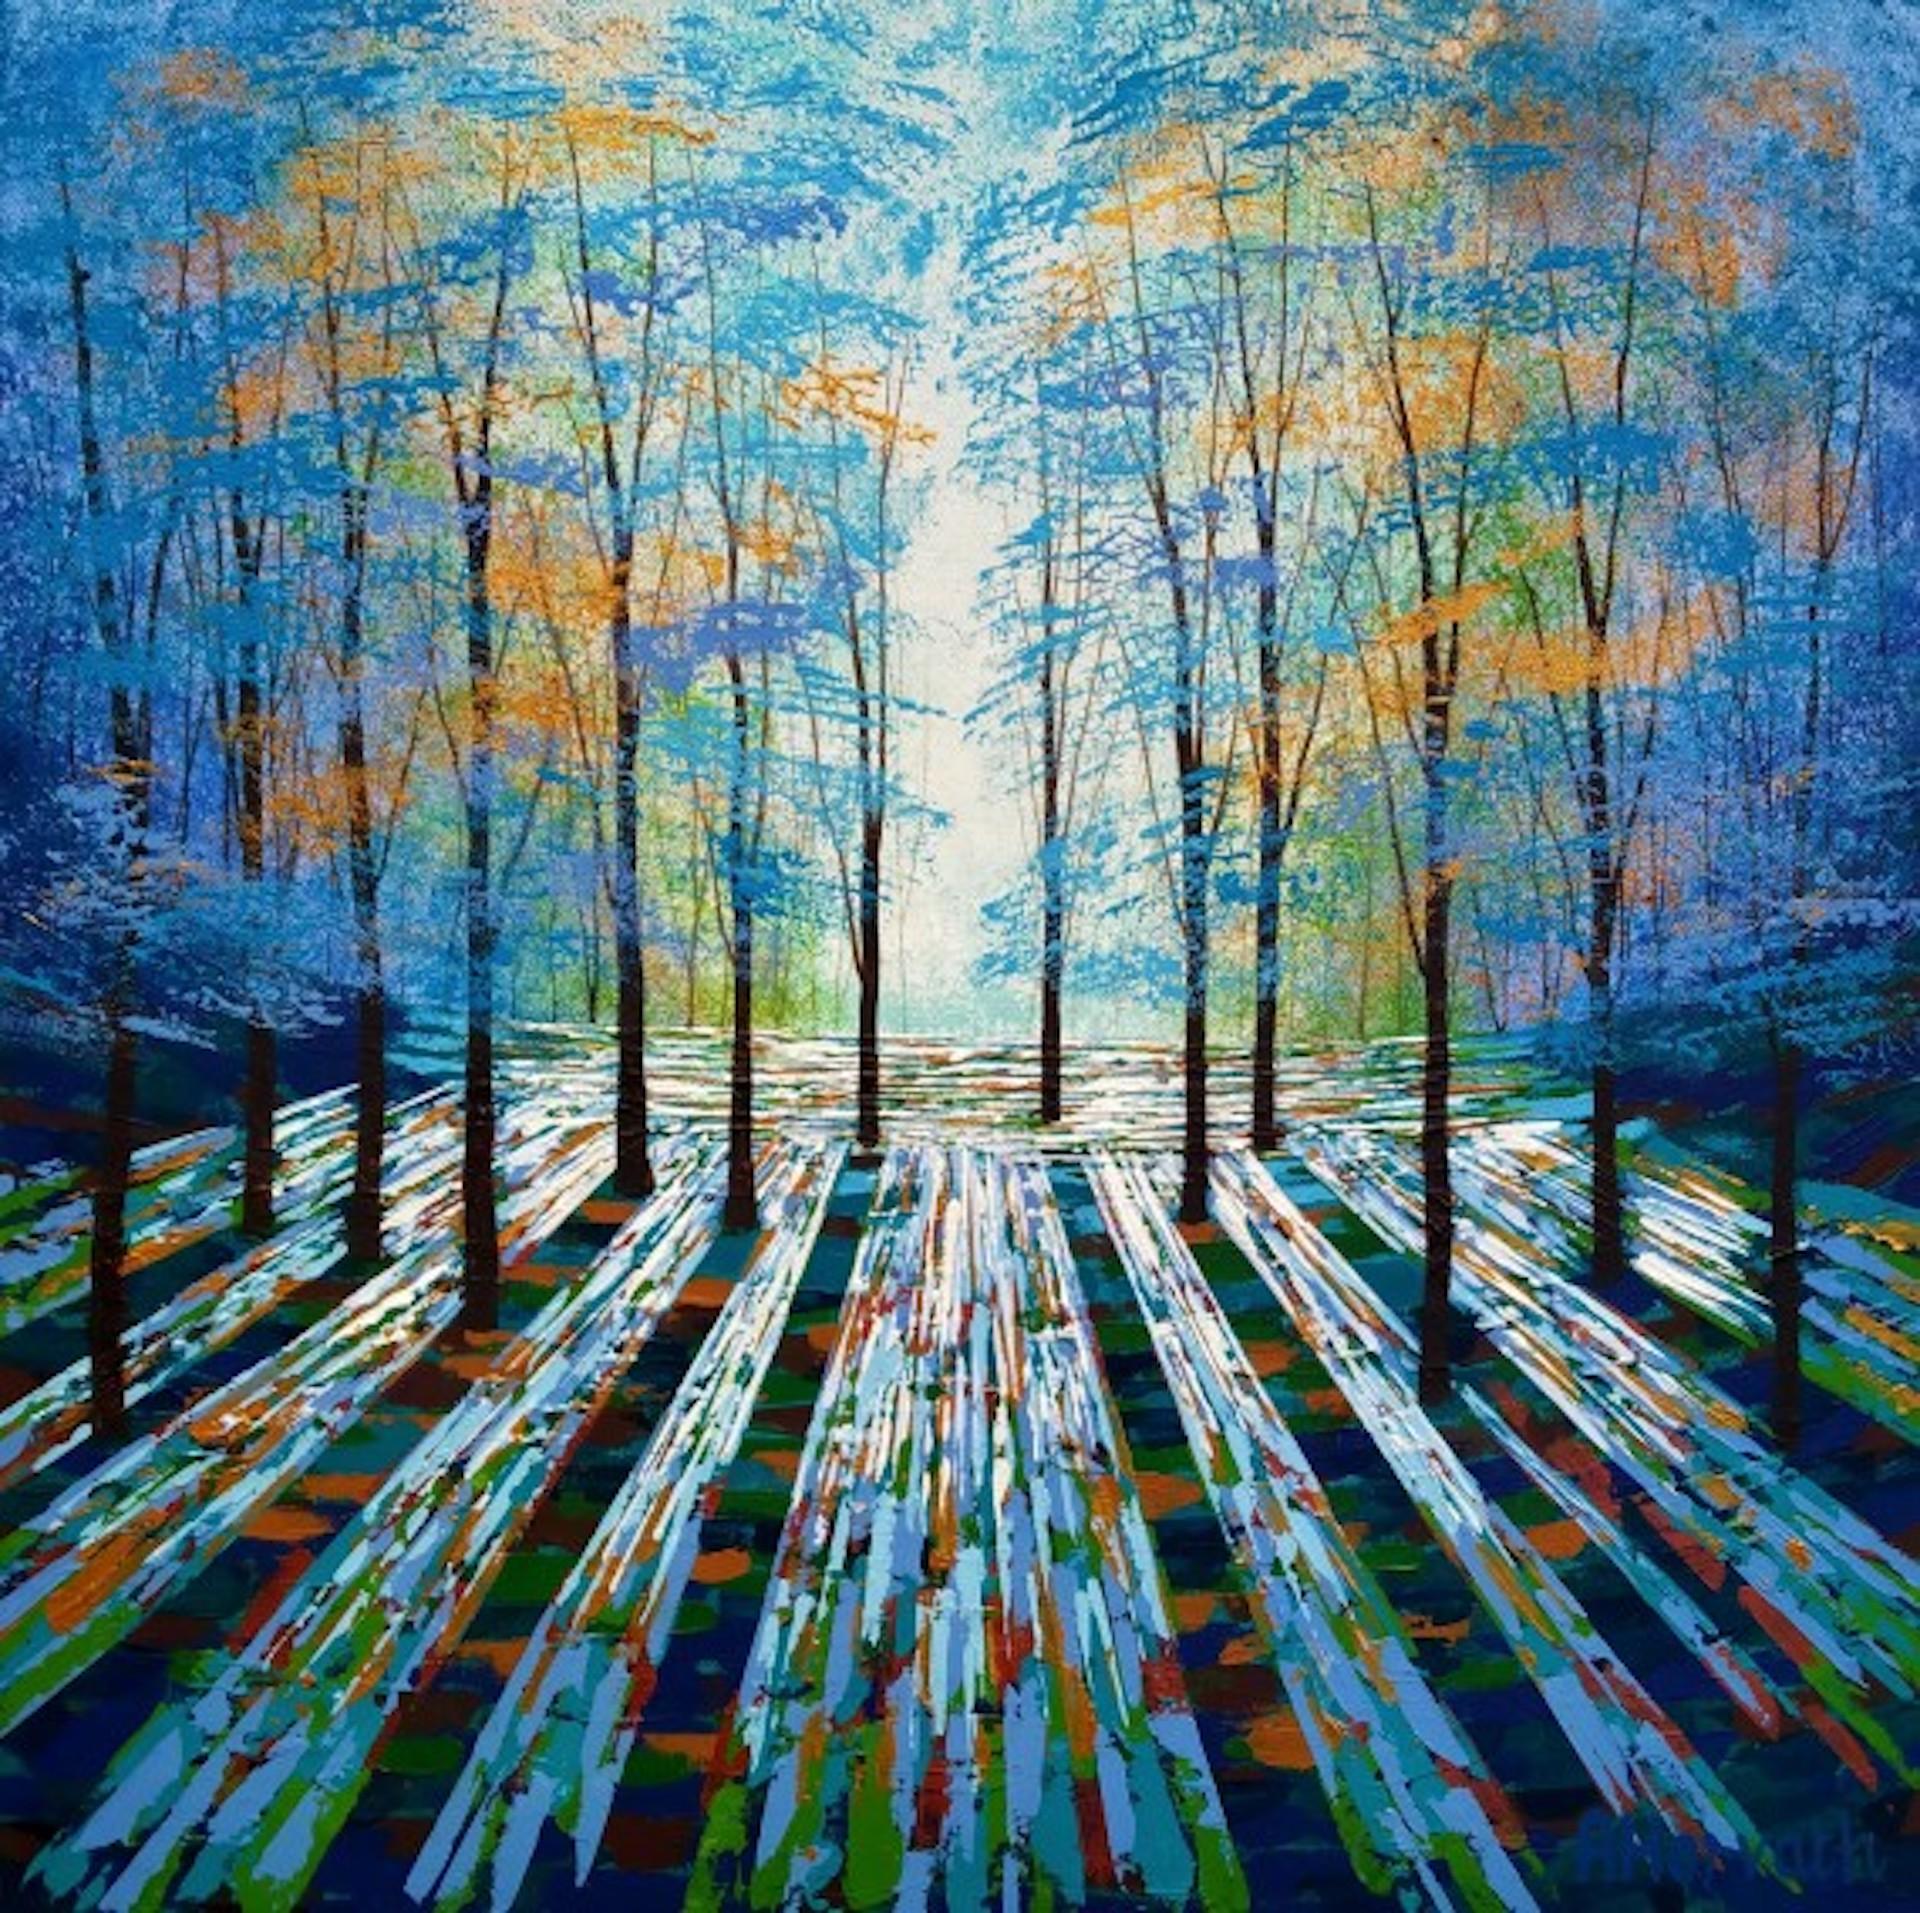 Woodland Daydream [2021]
Original

Landscapes and seascapes

Acrylics on canvas

Image size: H:60 cm x W:60 cm

Complete Size of Unframed Work: H:60 cm x W:60 cm x D:3.5cm

Sold Unframed

Please note that insitu images are purely an indication of